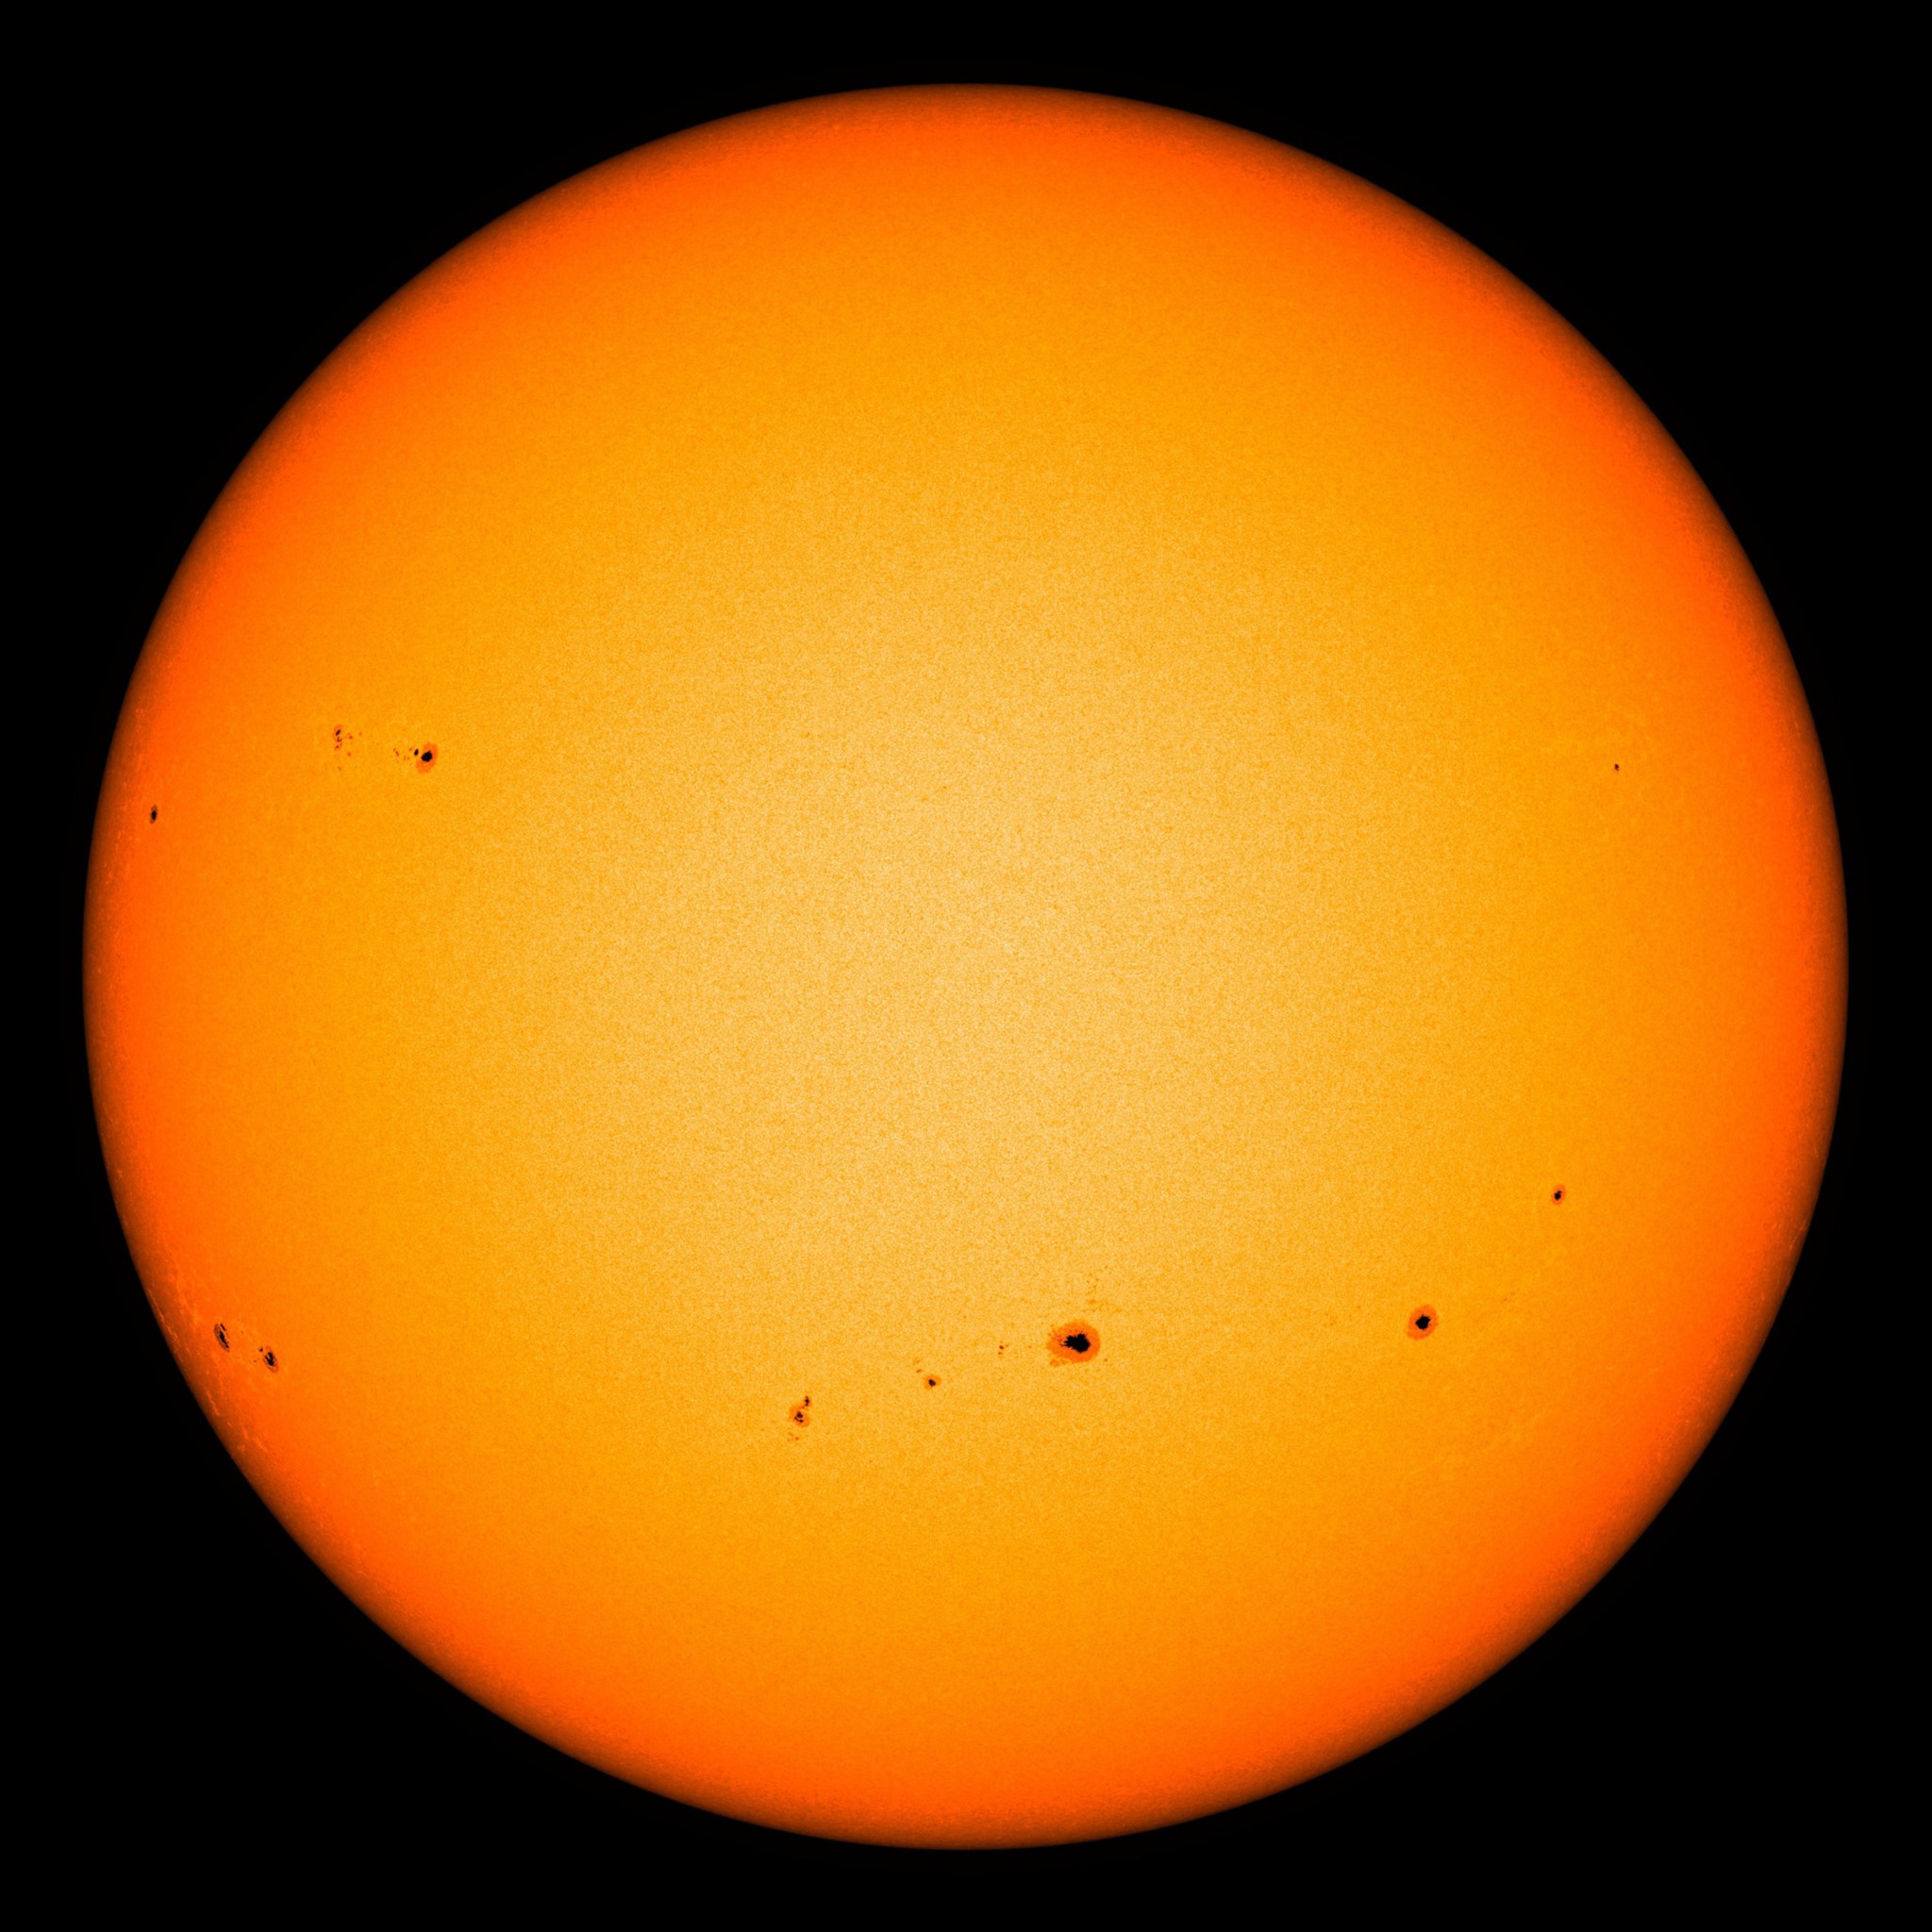 Image of the Sun with sunspots